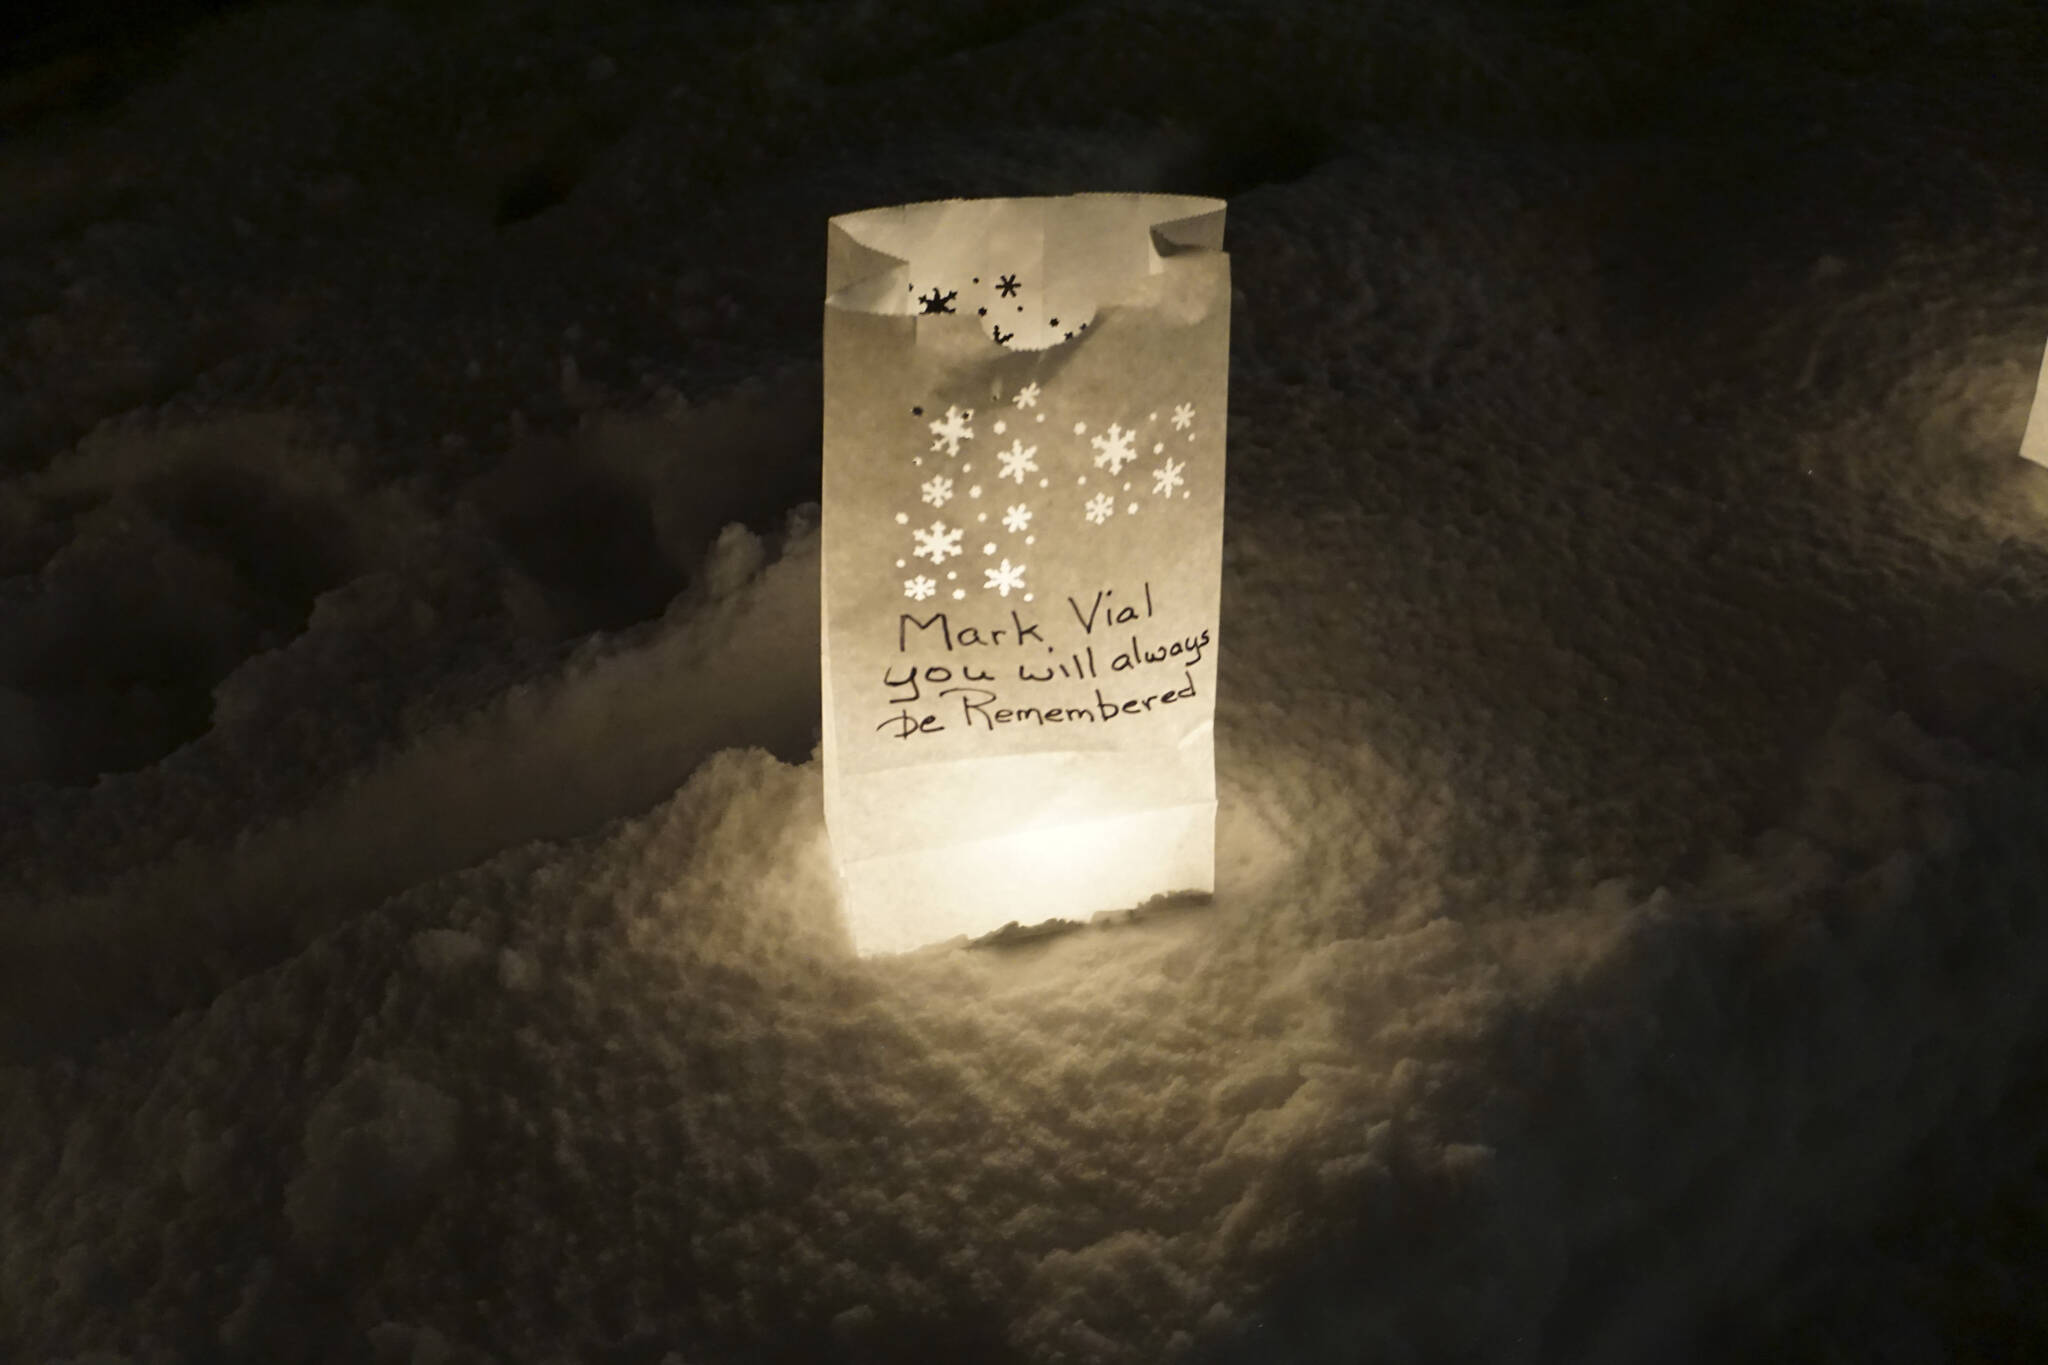 A luminaria in honor of Mark Vial, wo died on June 29, 2022, was one of the lanterns put up at Light Up a Life, a fundraiser for Hospice of Homer, on Thursday, Dec. 15, 2022, at WKFL Park in Homer, Alaska. (Photo by Michael Armstrong/Homer News)